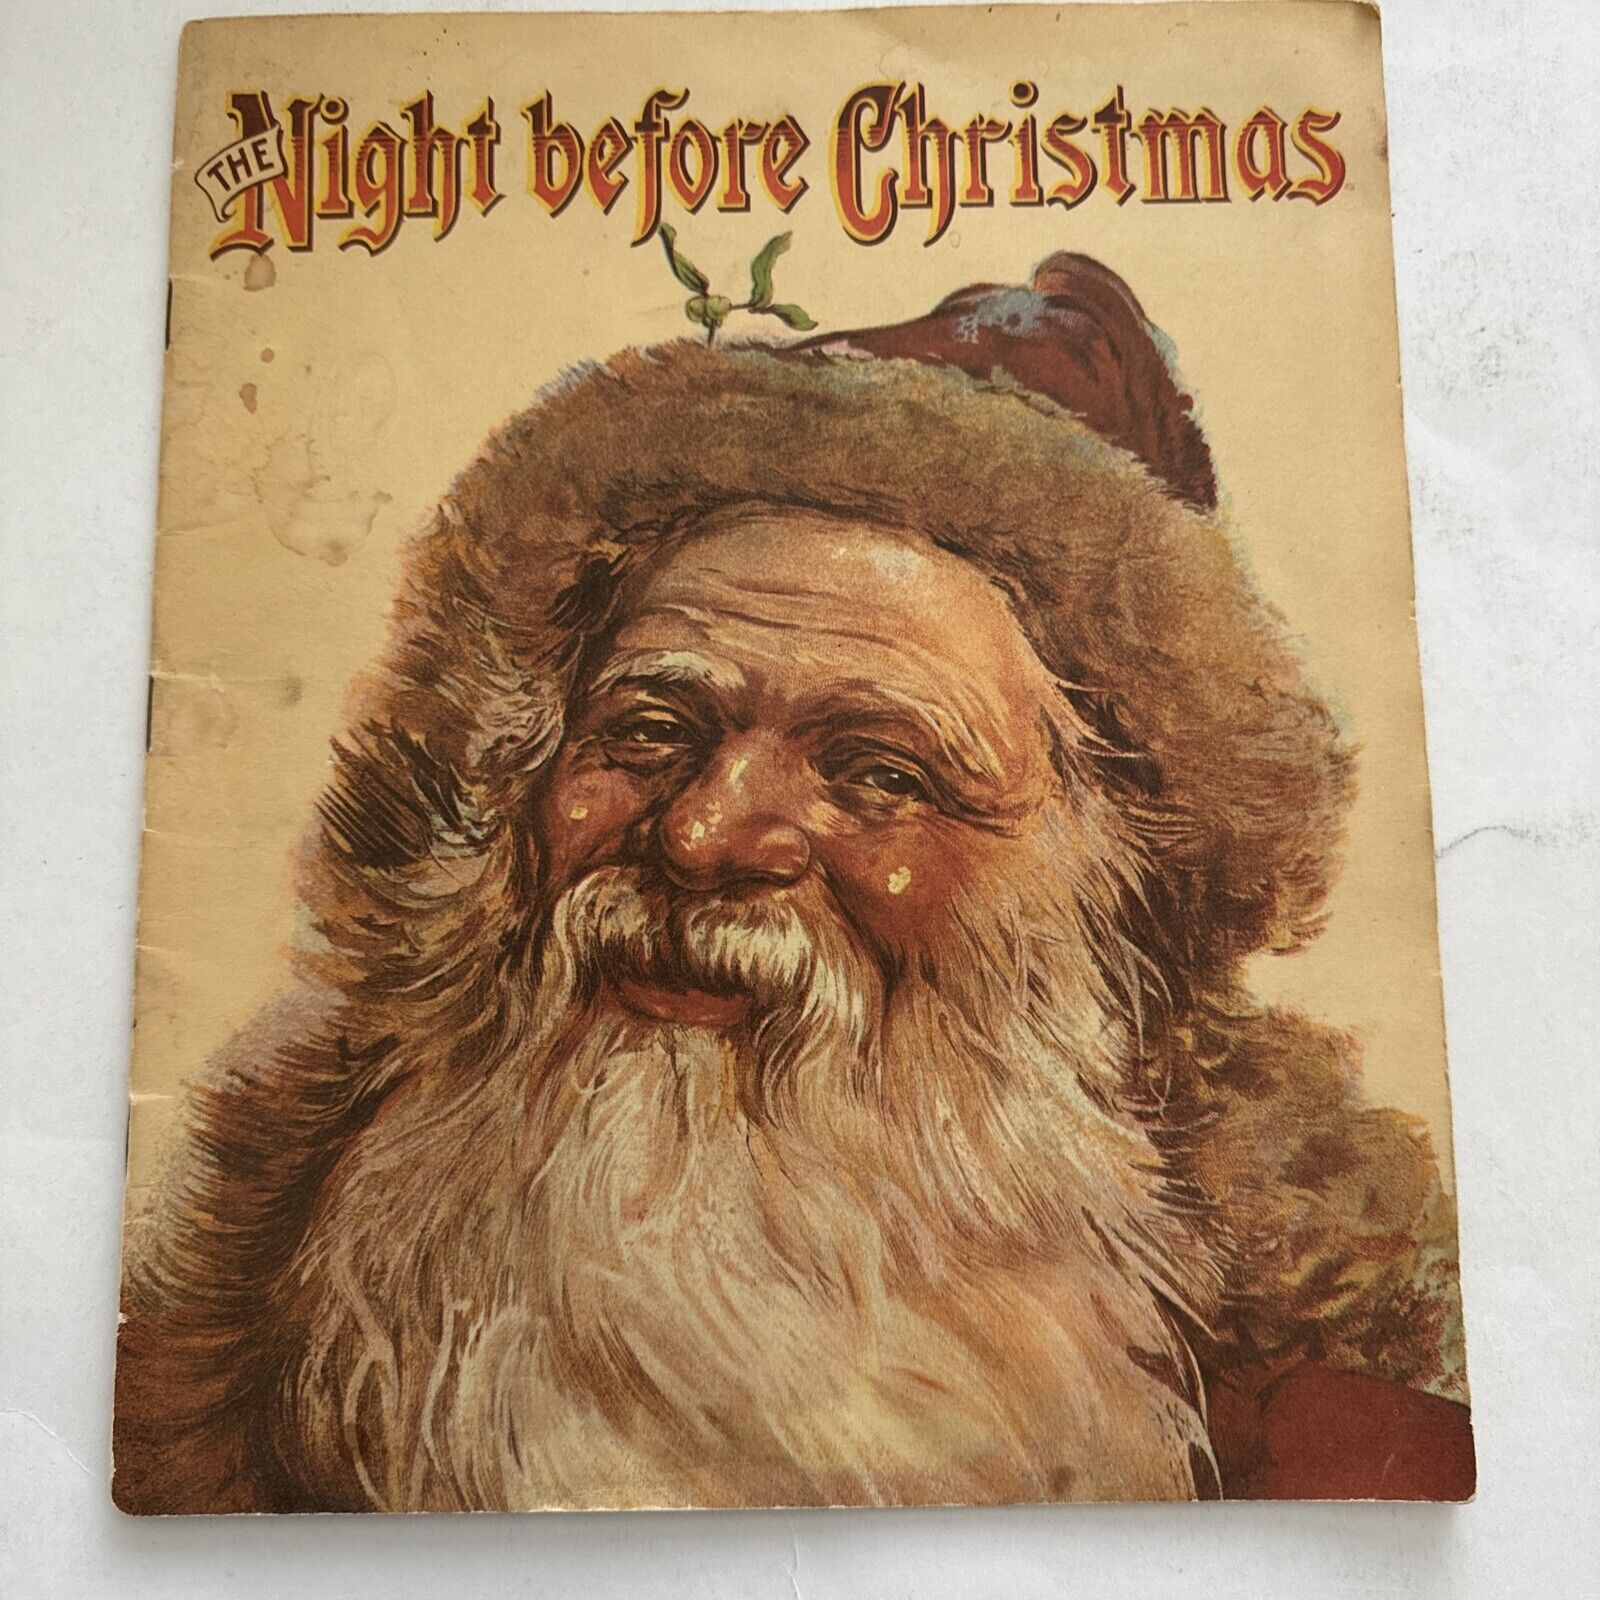 The Night Before Christmas c 1919 Reproduction of Early Original Evergreen Press